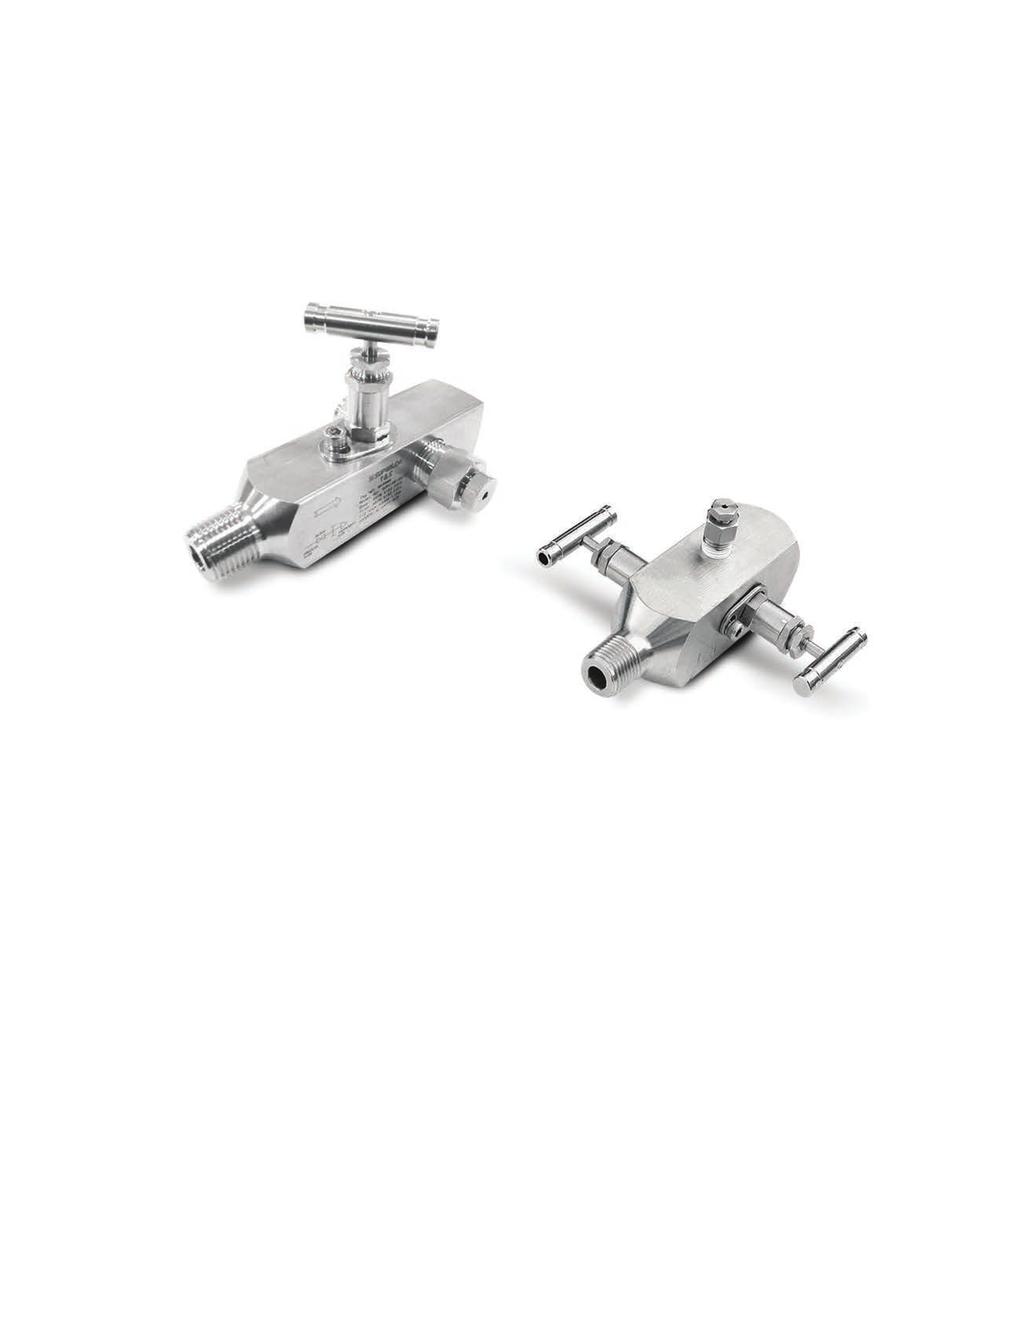 Instrumentation Gauge Valves SGBV / SGBV2 Series Features Stainless Steel construction. 1/2 in. and 3/4 in, male to 1/2 in. female end connections. 1/2 in. female gauge ports standard.